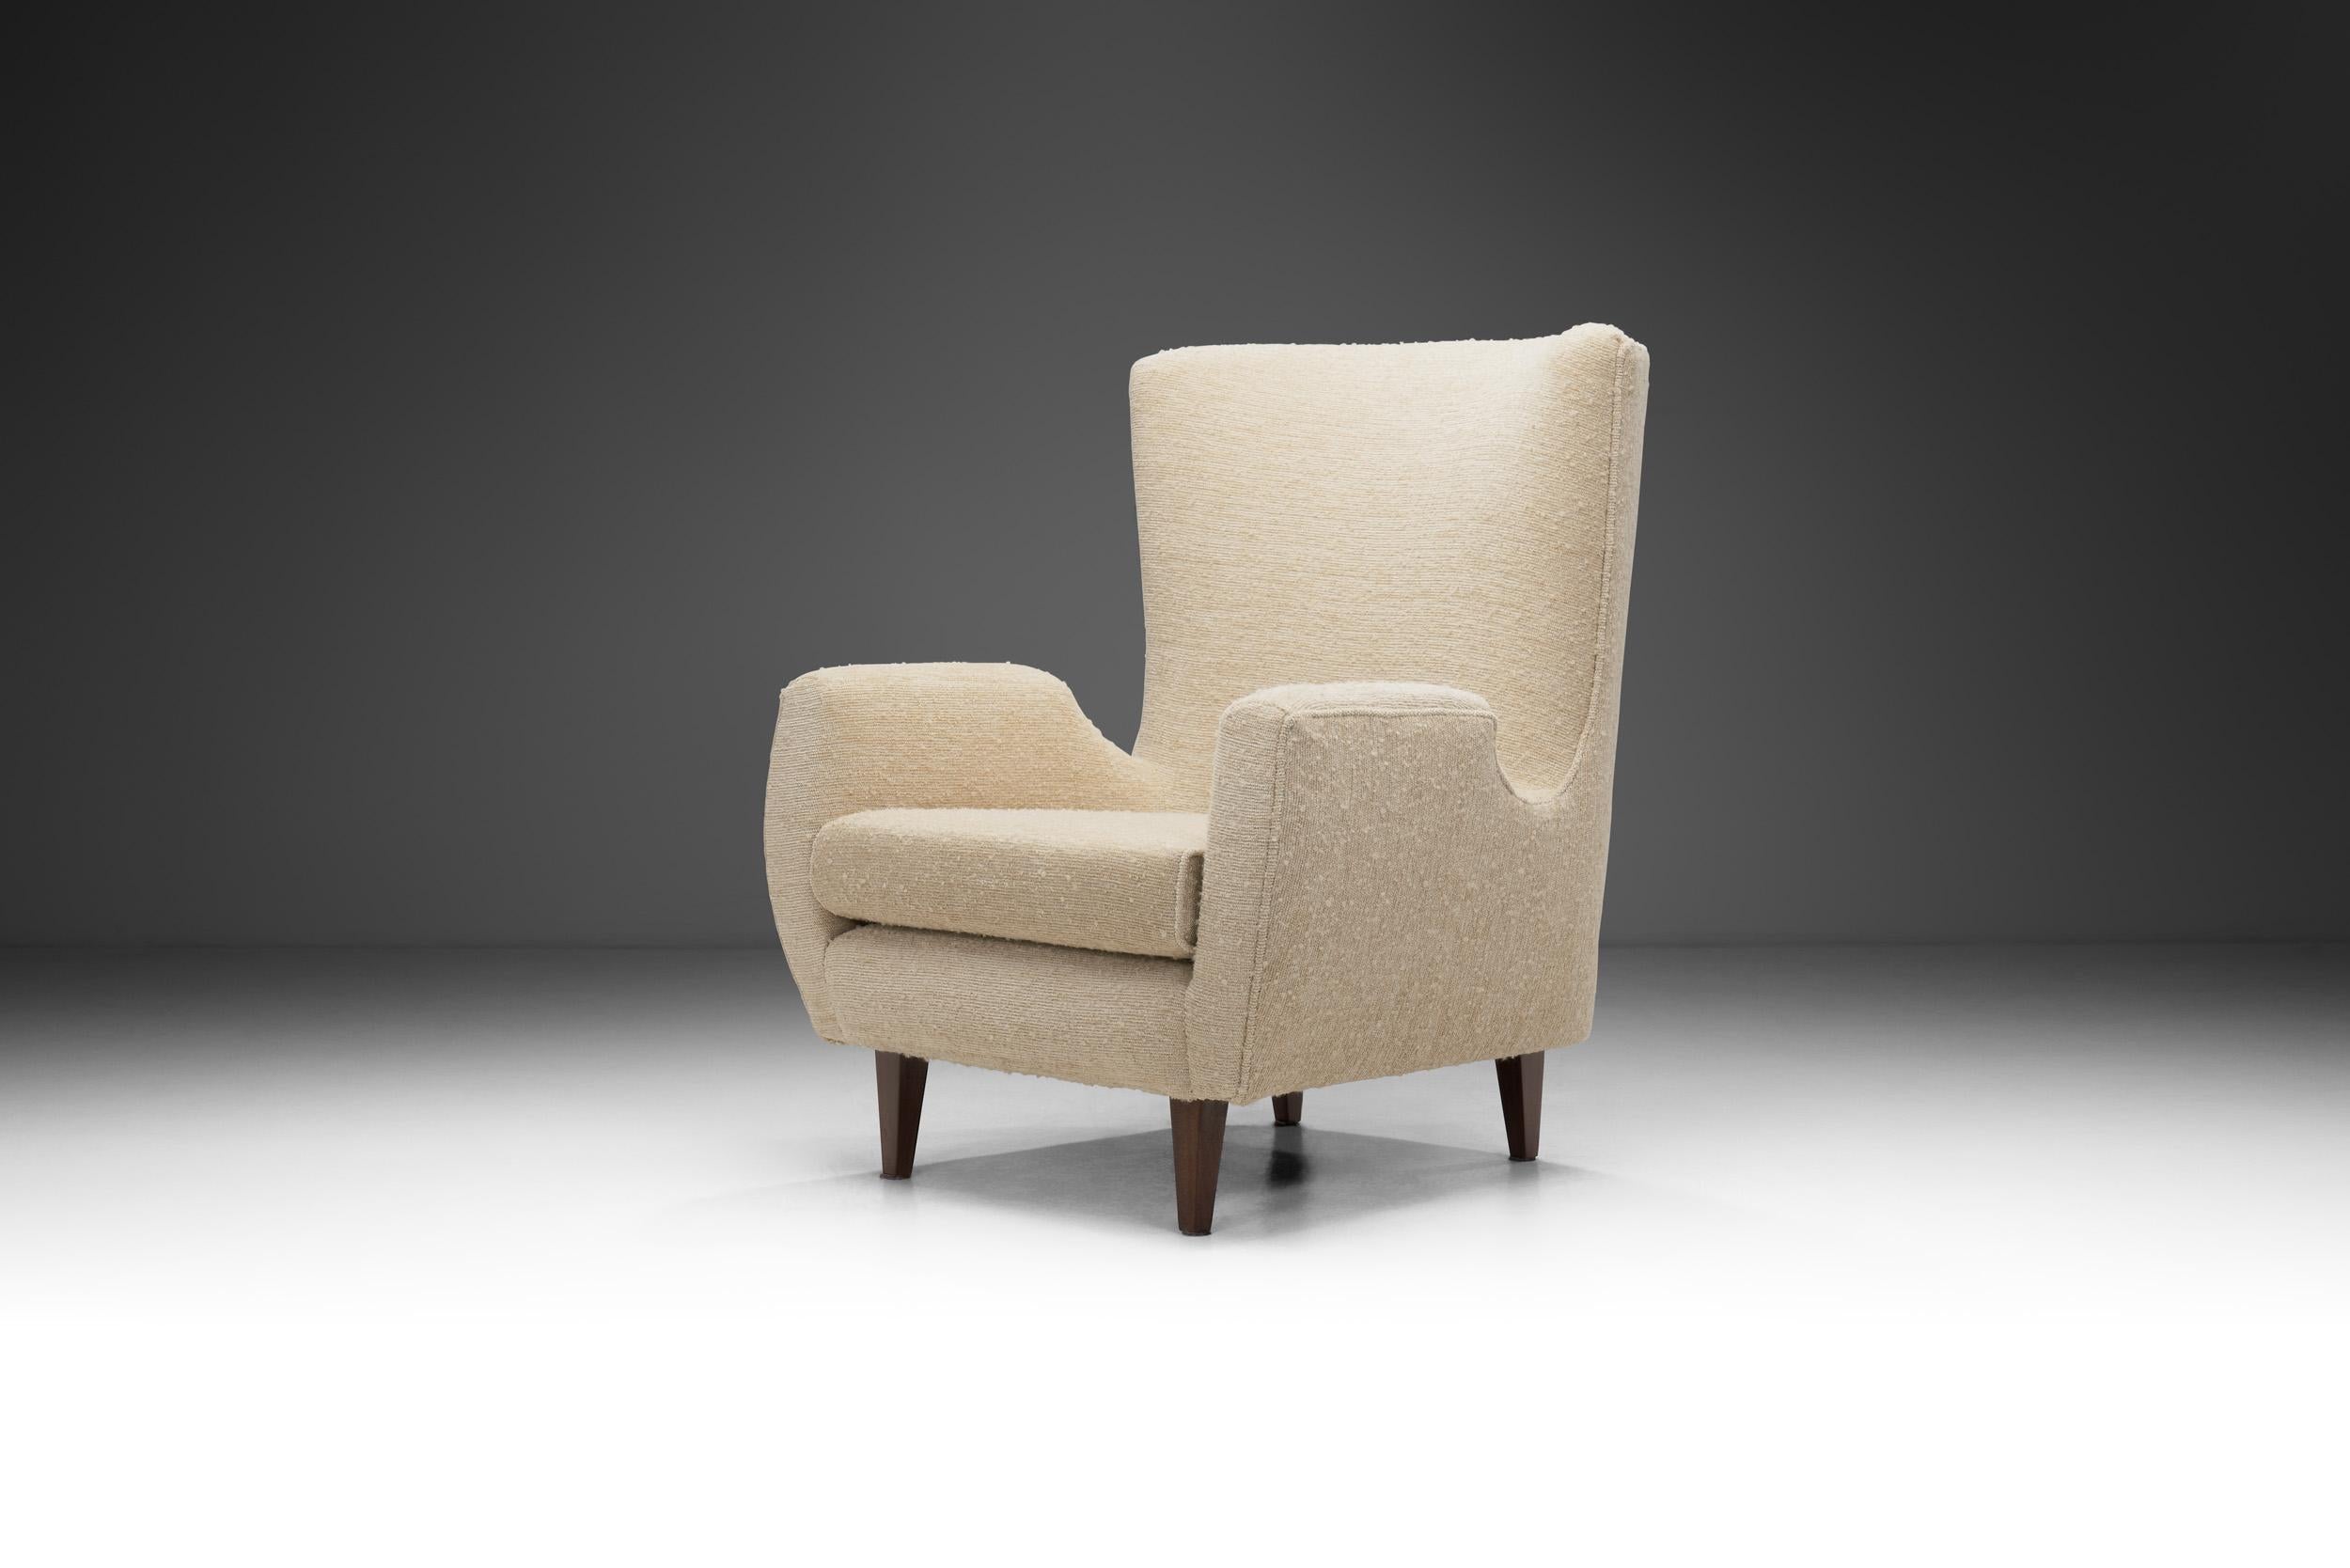 Mid-century modern is to-the-point and no-nonsense, much like the straightforward interior style, which championed notions of functionality, ease and modern simplicity. This armchair is a great representation of the quality and craftsmanship of